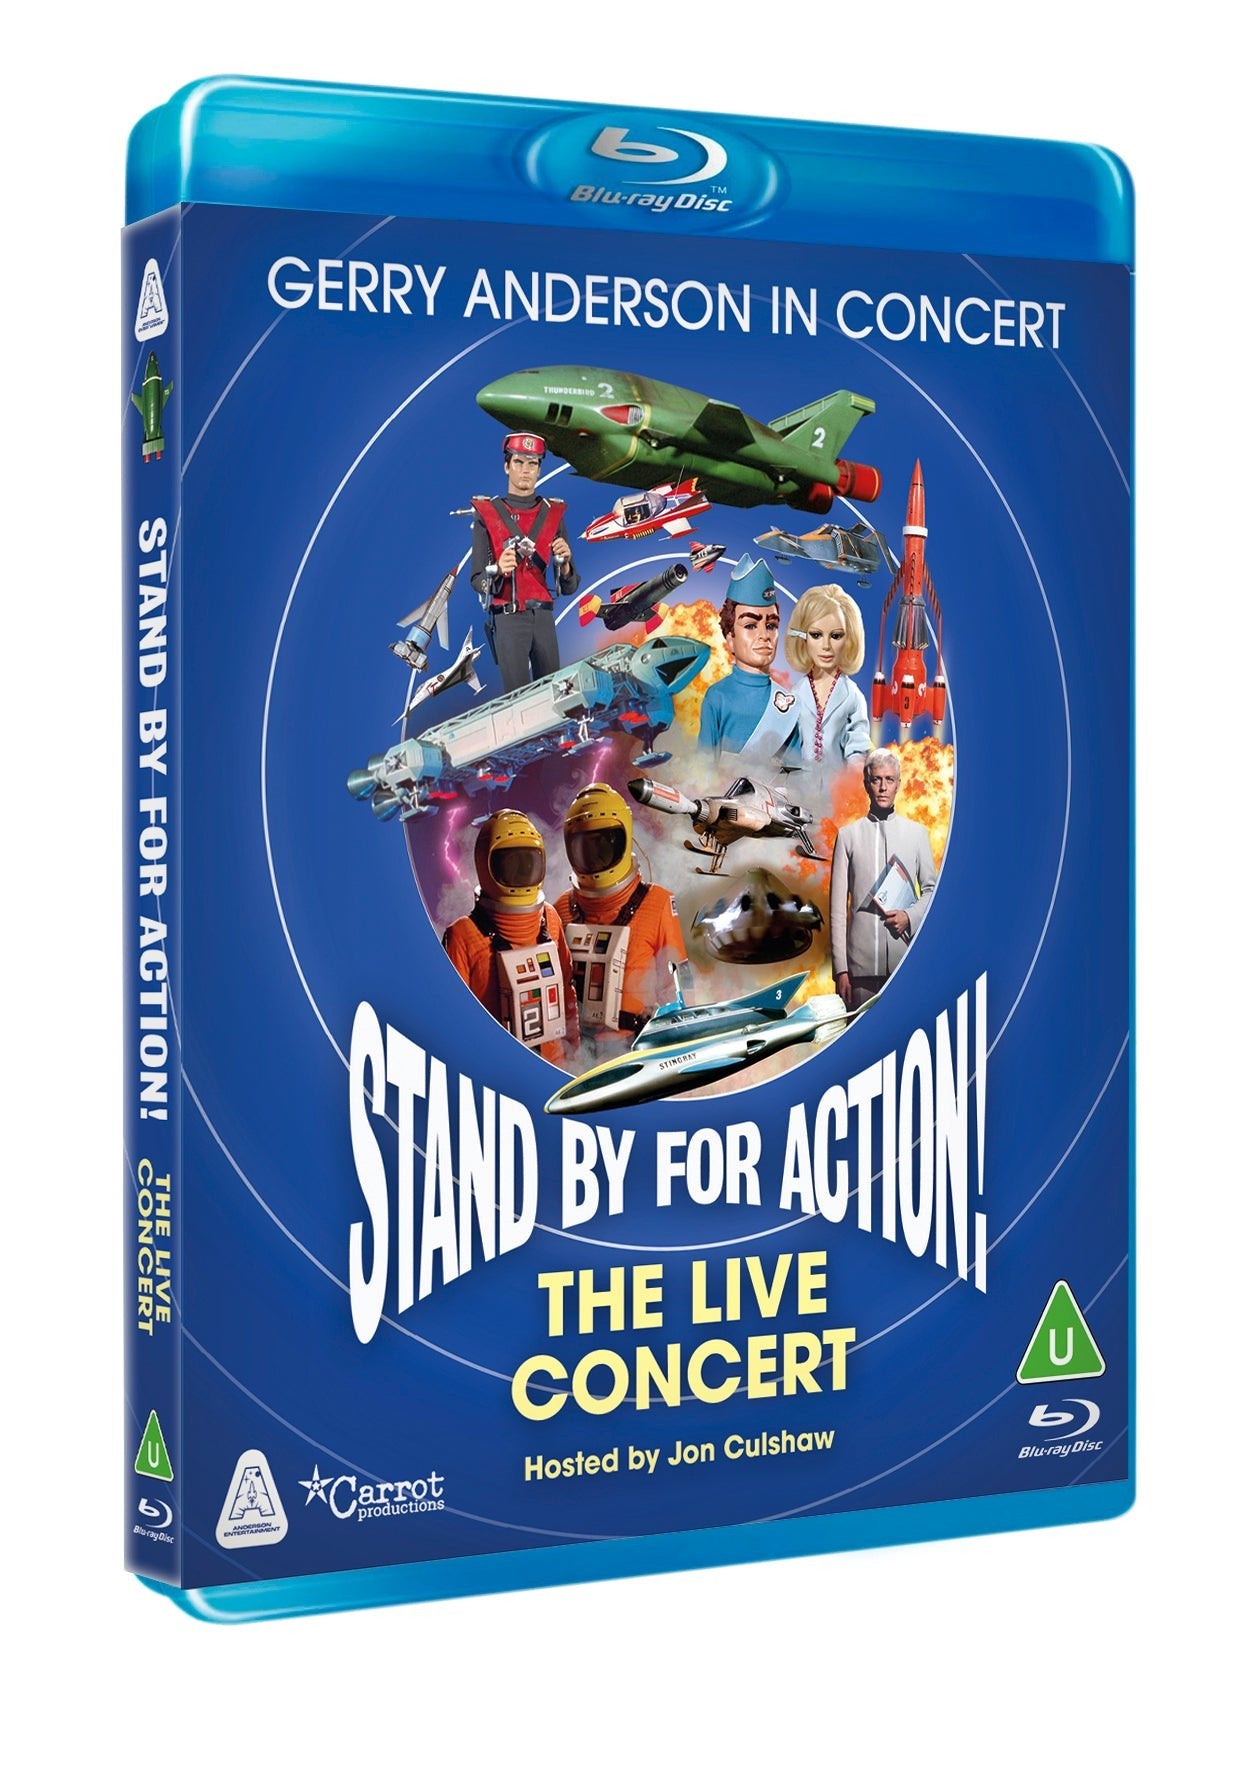 Coming Soon to the Store - Insiders Preview - The Gerry Anderson Store